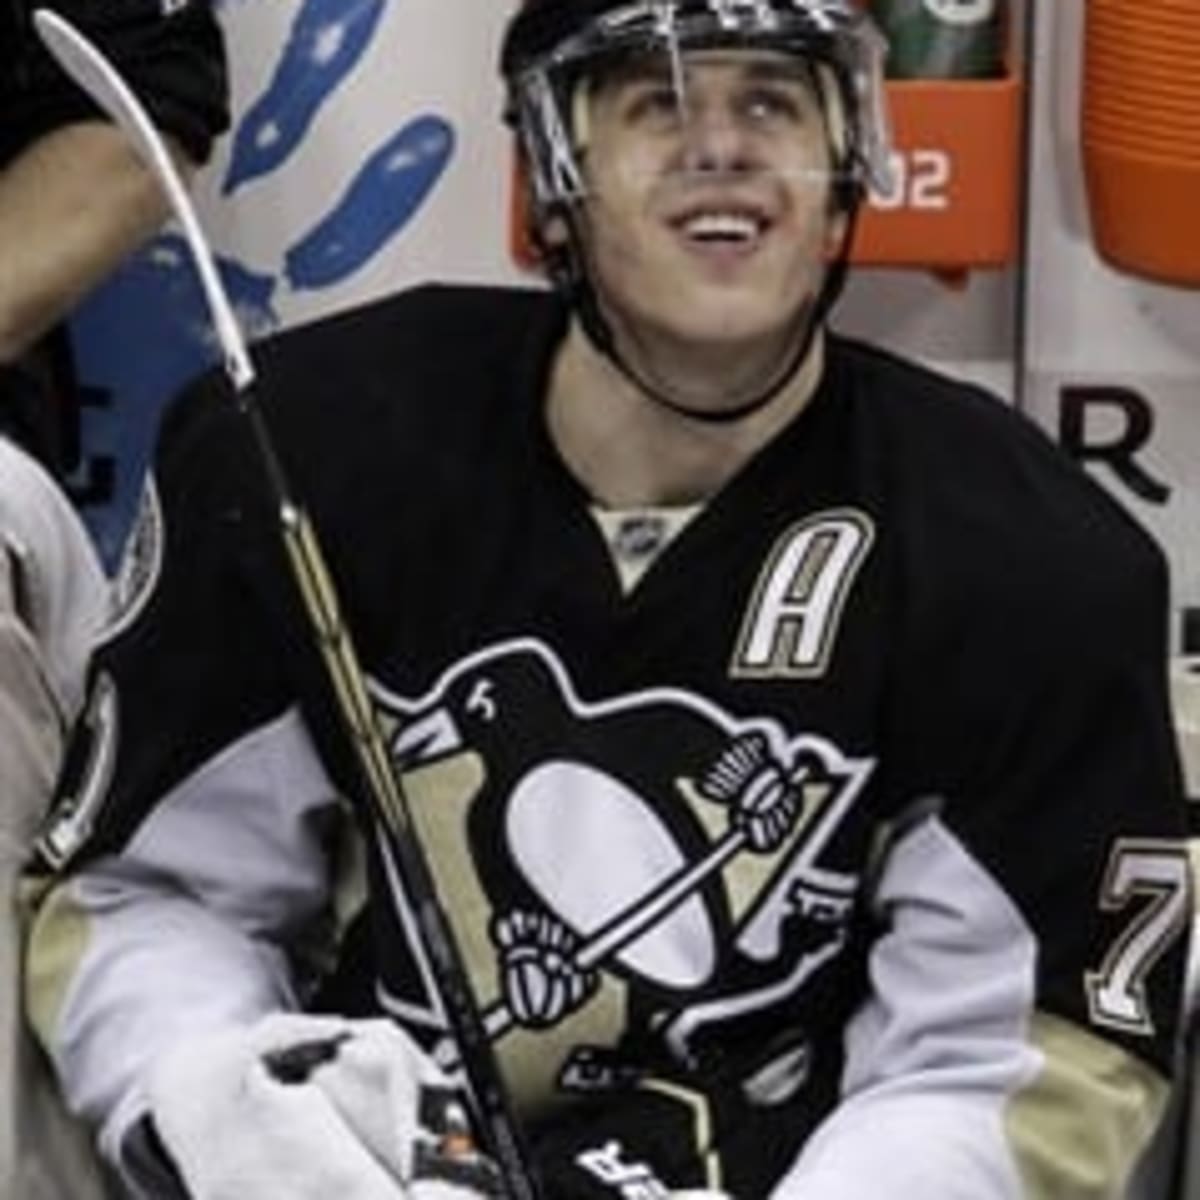 Evgeni Malkin discusses injury scare, says he'll play Sunday vs